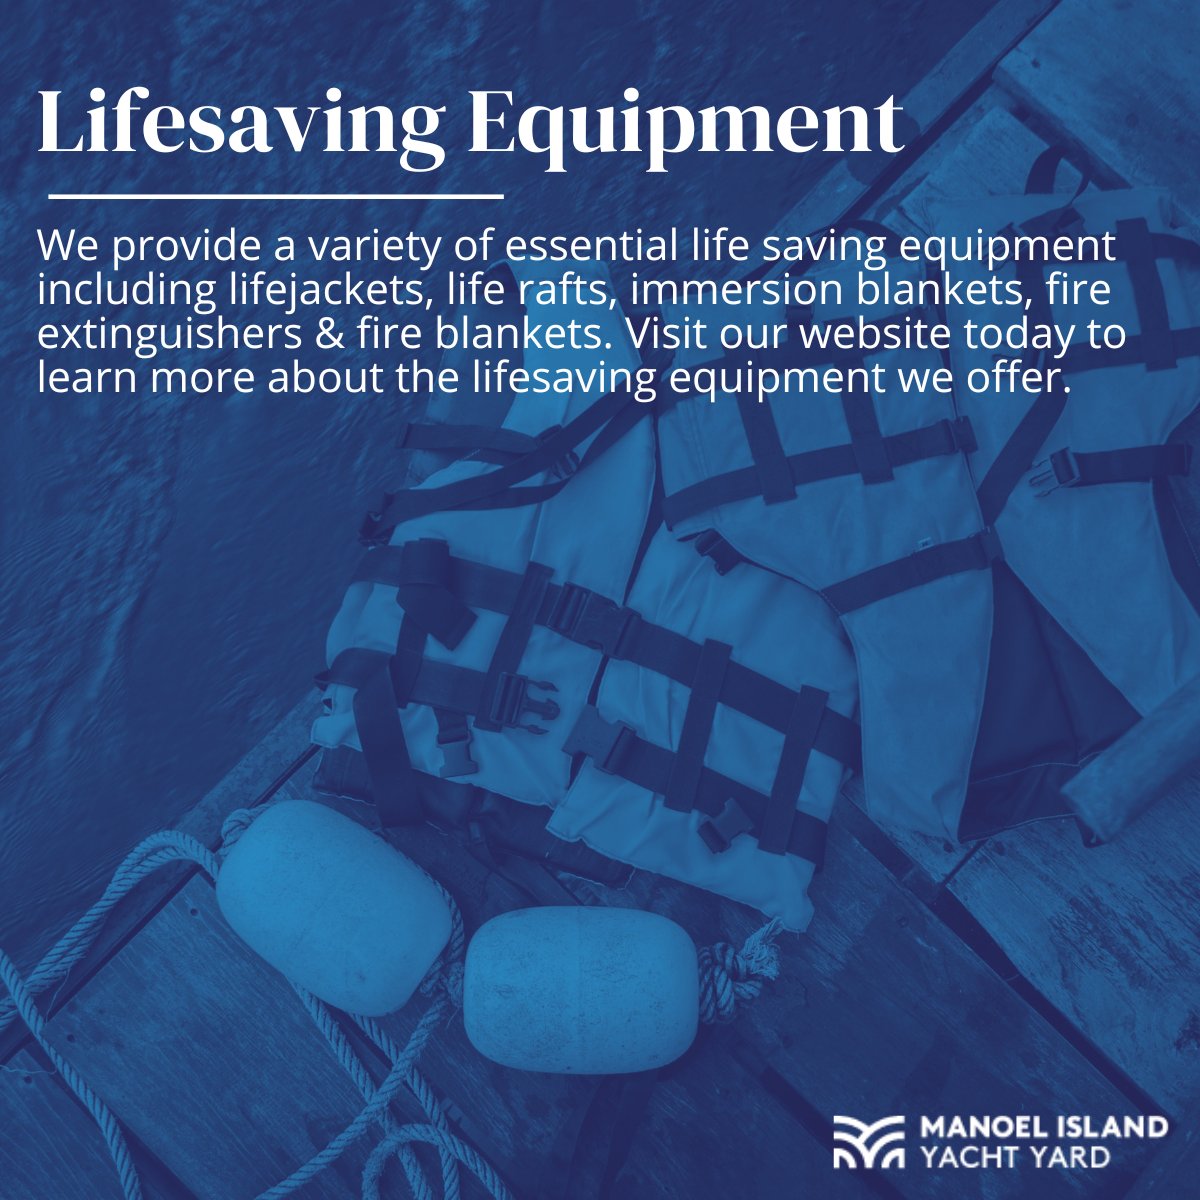 At Manoel Island Yacht Yard, we take pride in the fact that we offer our clients a Lloyds Accredited fully equipped lifesaving equipment service station that provides an essential service to our clients.

bit.ly/3wI4QZ1

#yachtrefit #superyachtrefit